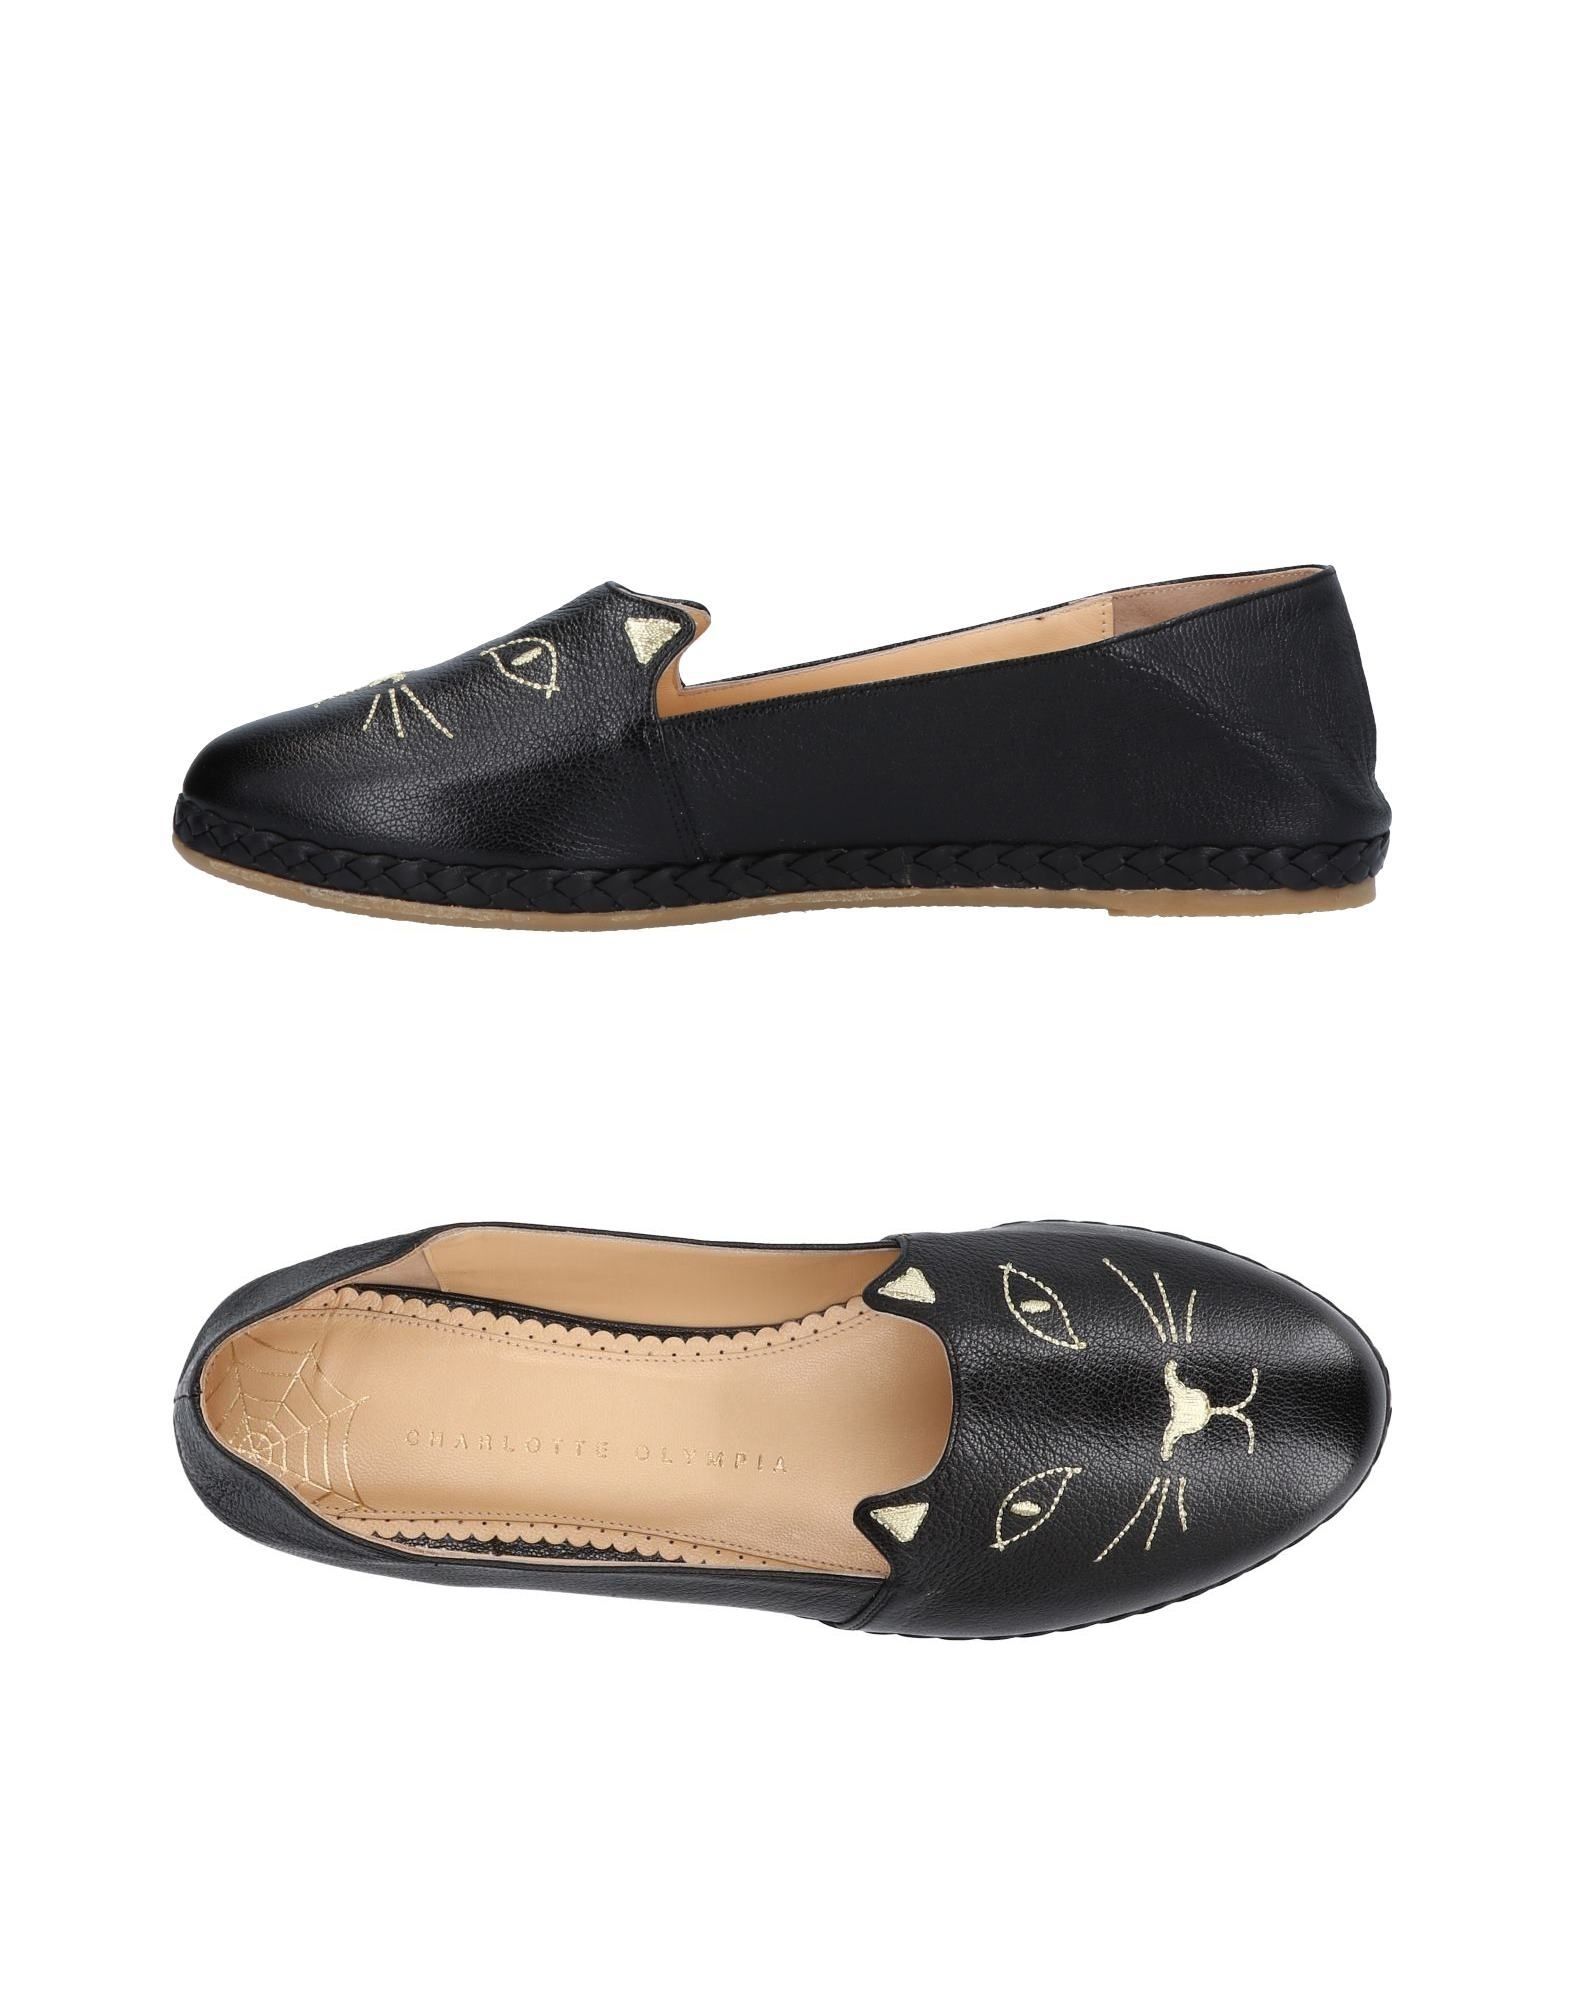 CHARLOTTE OLYMPIA CHARLOTTE OLYMPIA WOMAN BALLET FLATS BLACK SIZE 4 SOFT LEATHER,11463687BK 7